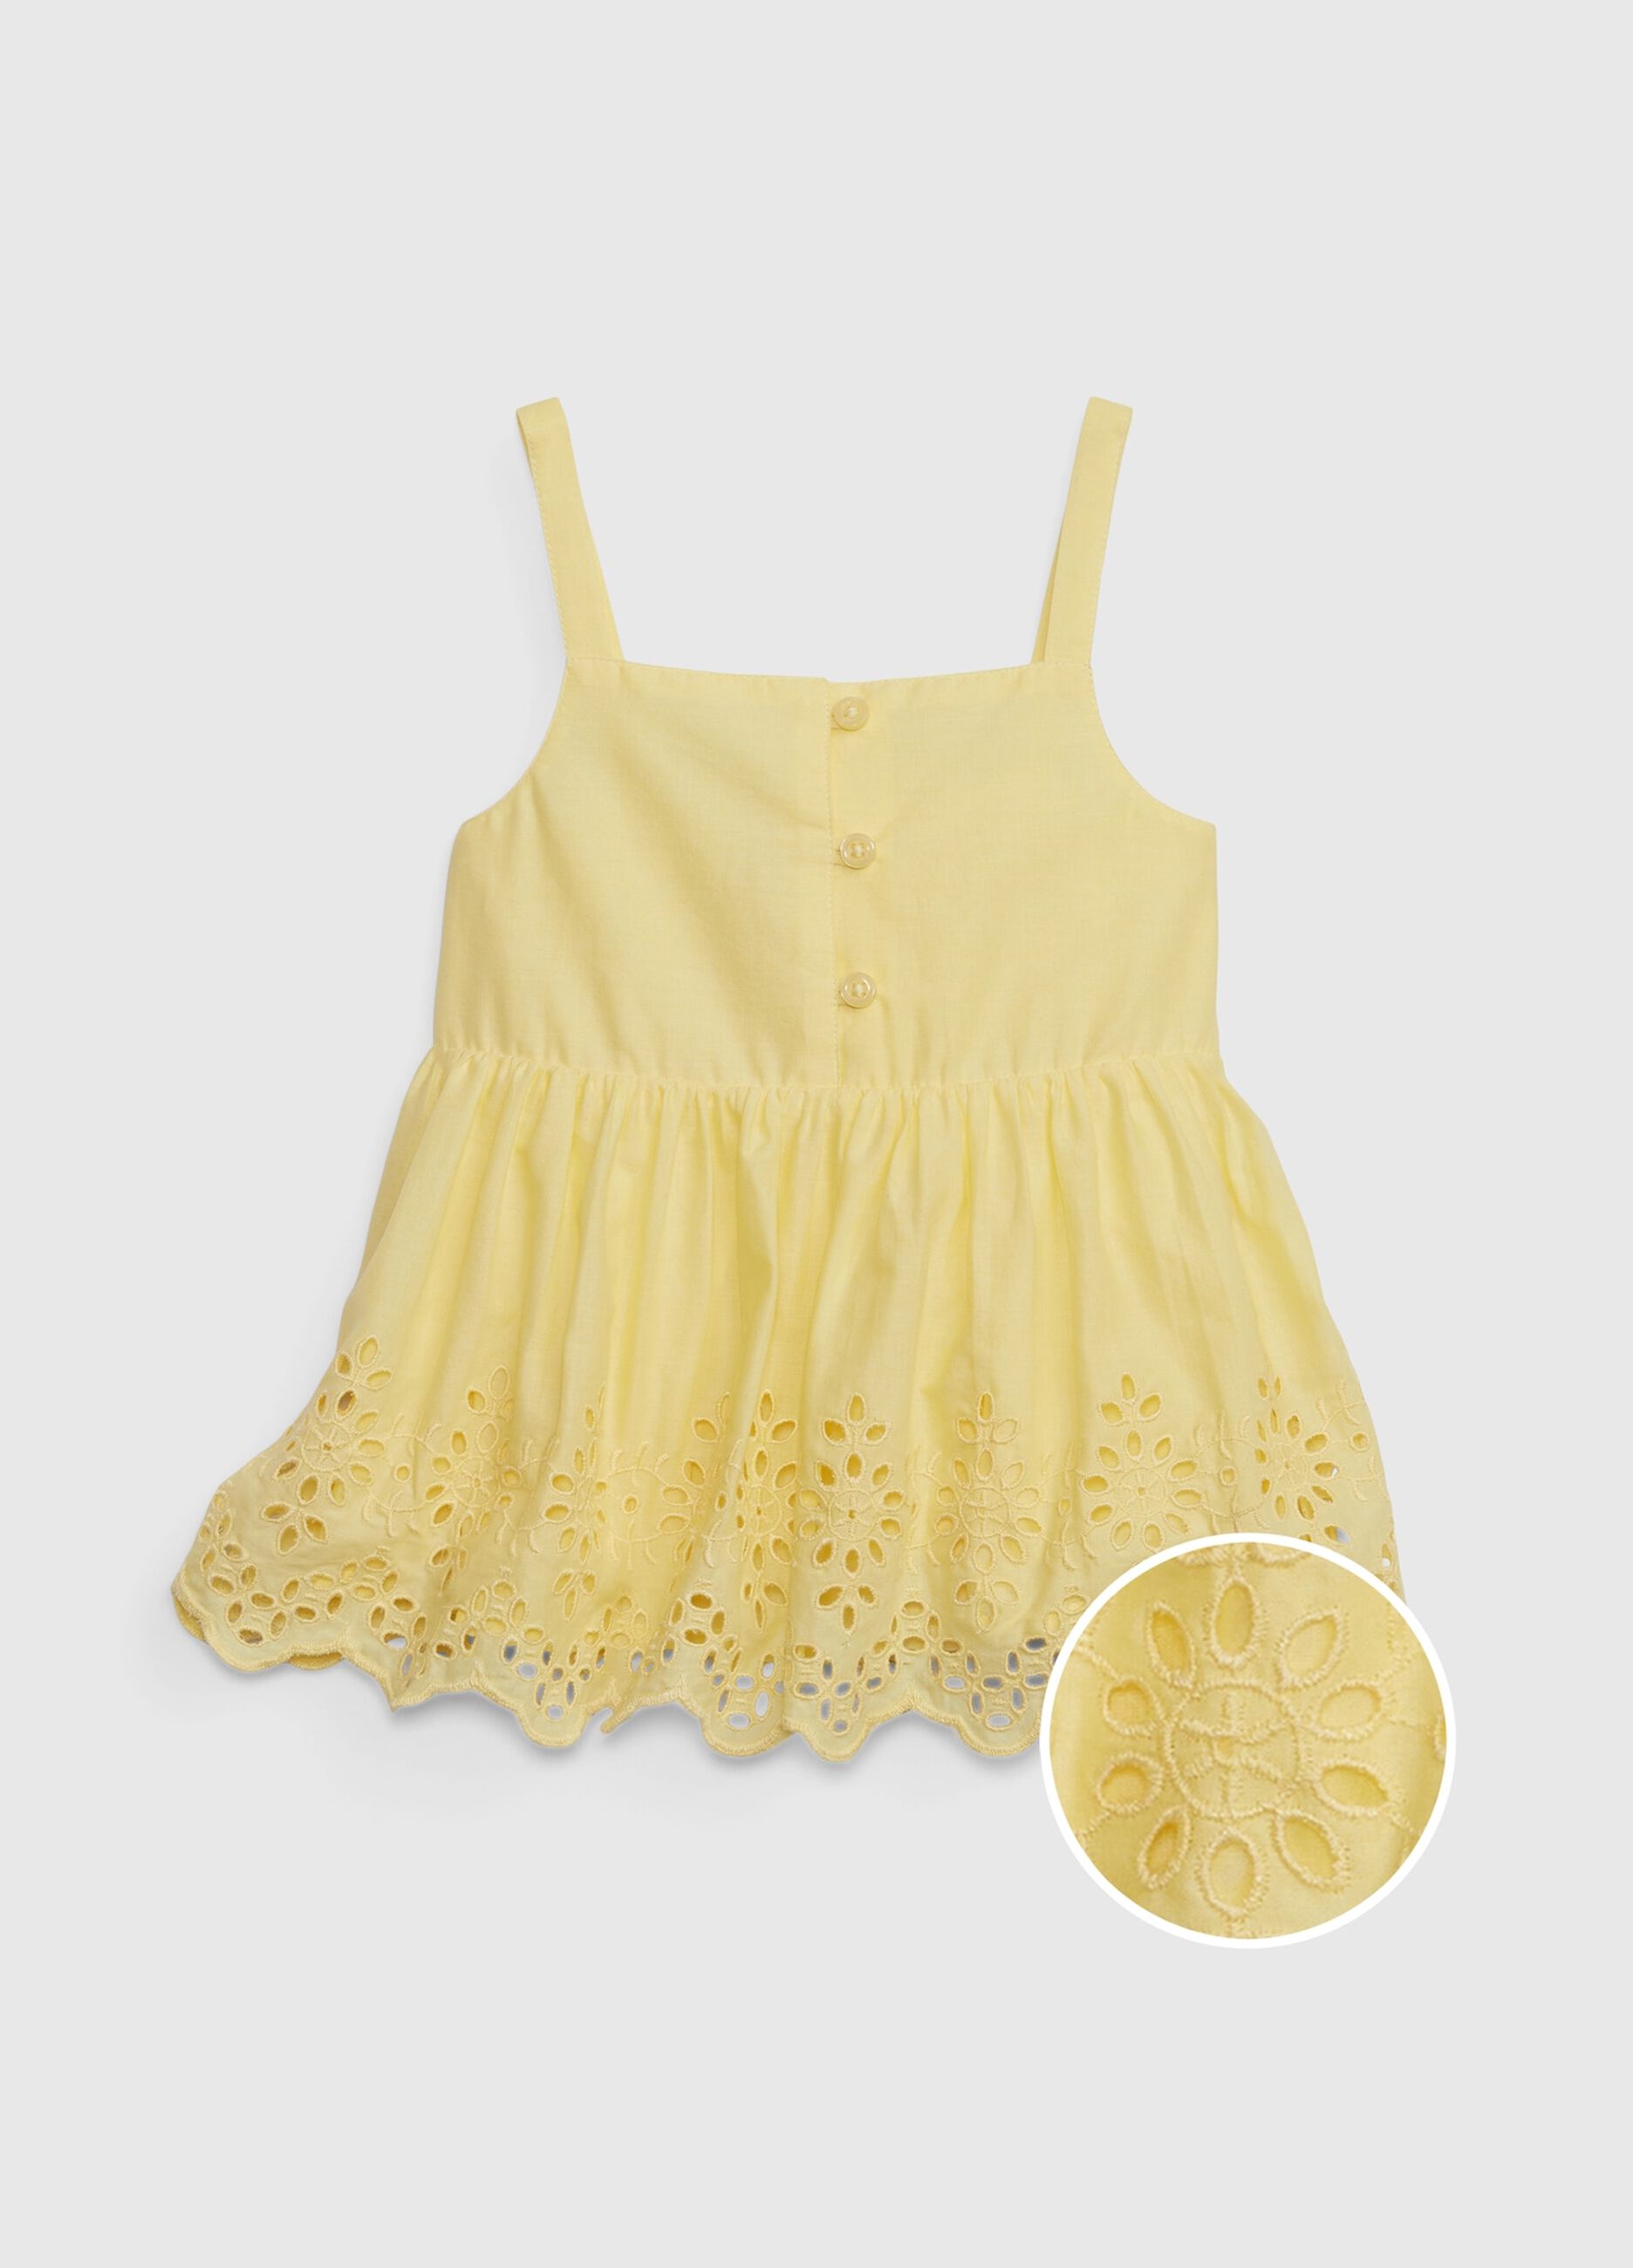 Tank top in broderie anglaise cotton.